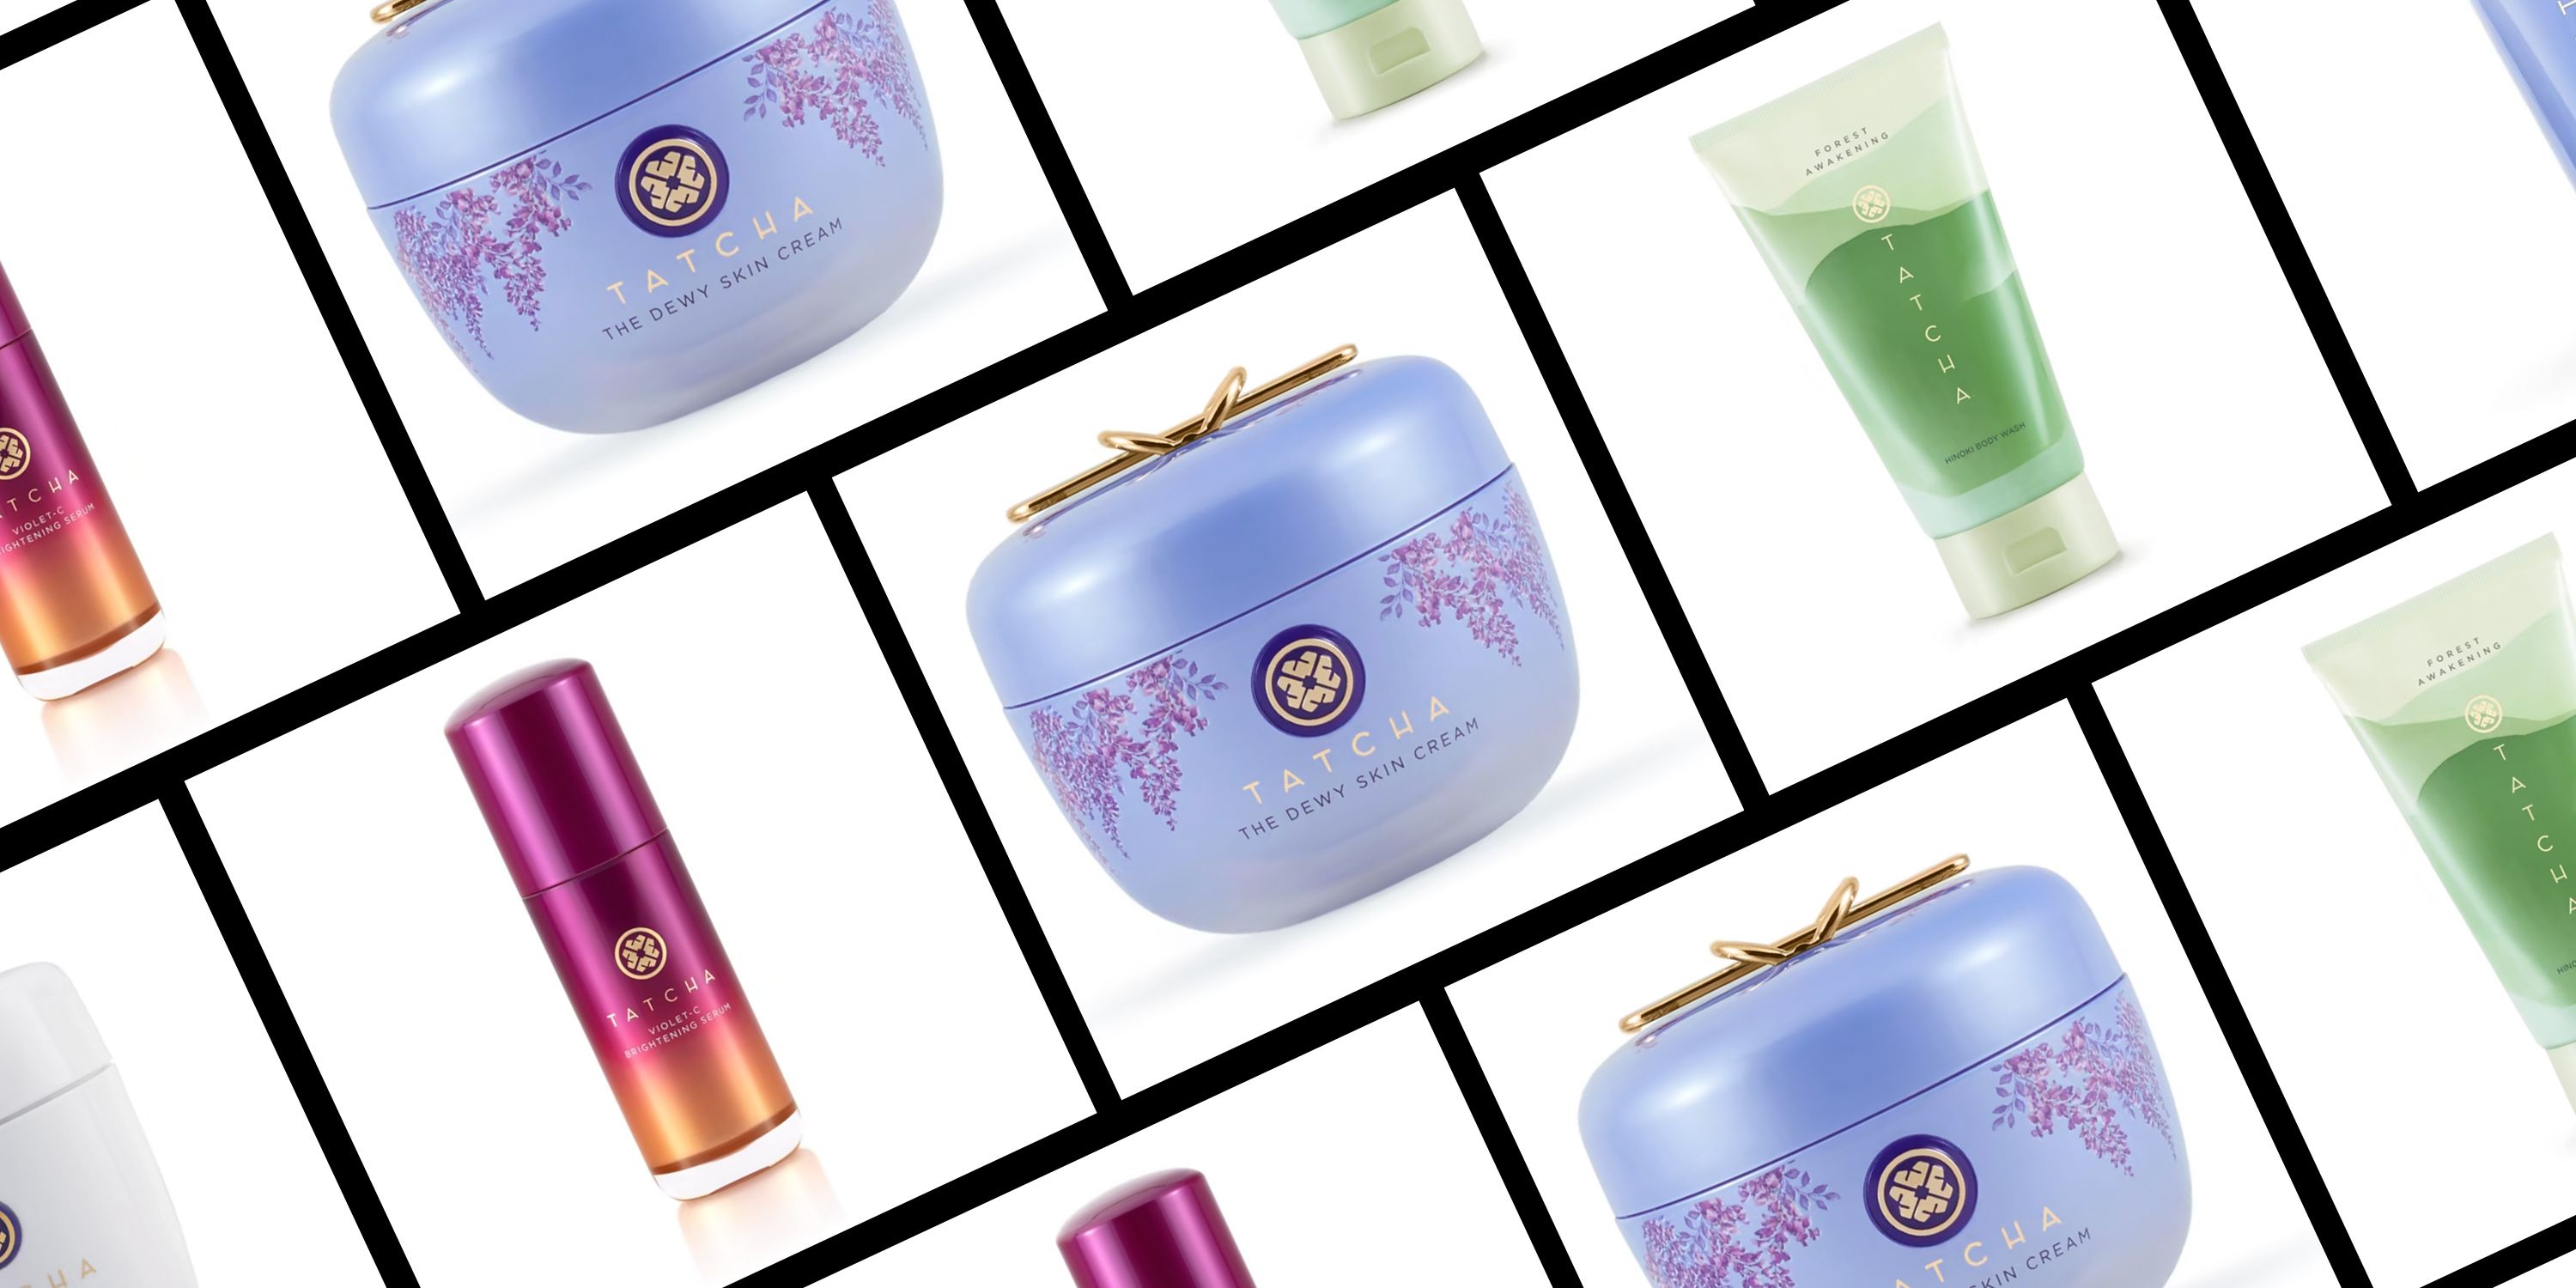 The 12 Best Tatcha Products to Add to Your Skincare Routine